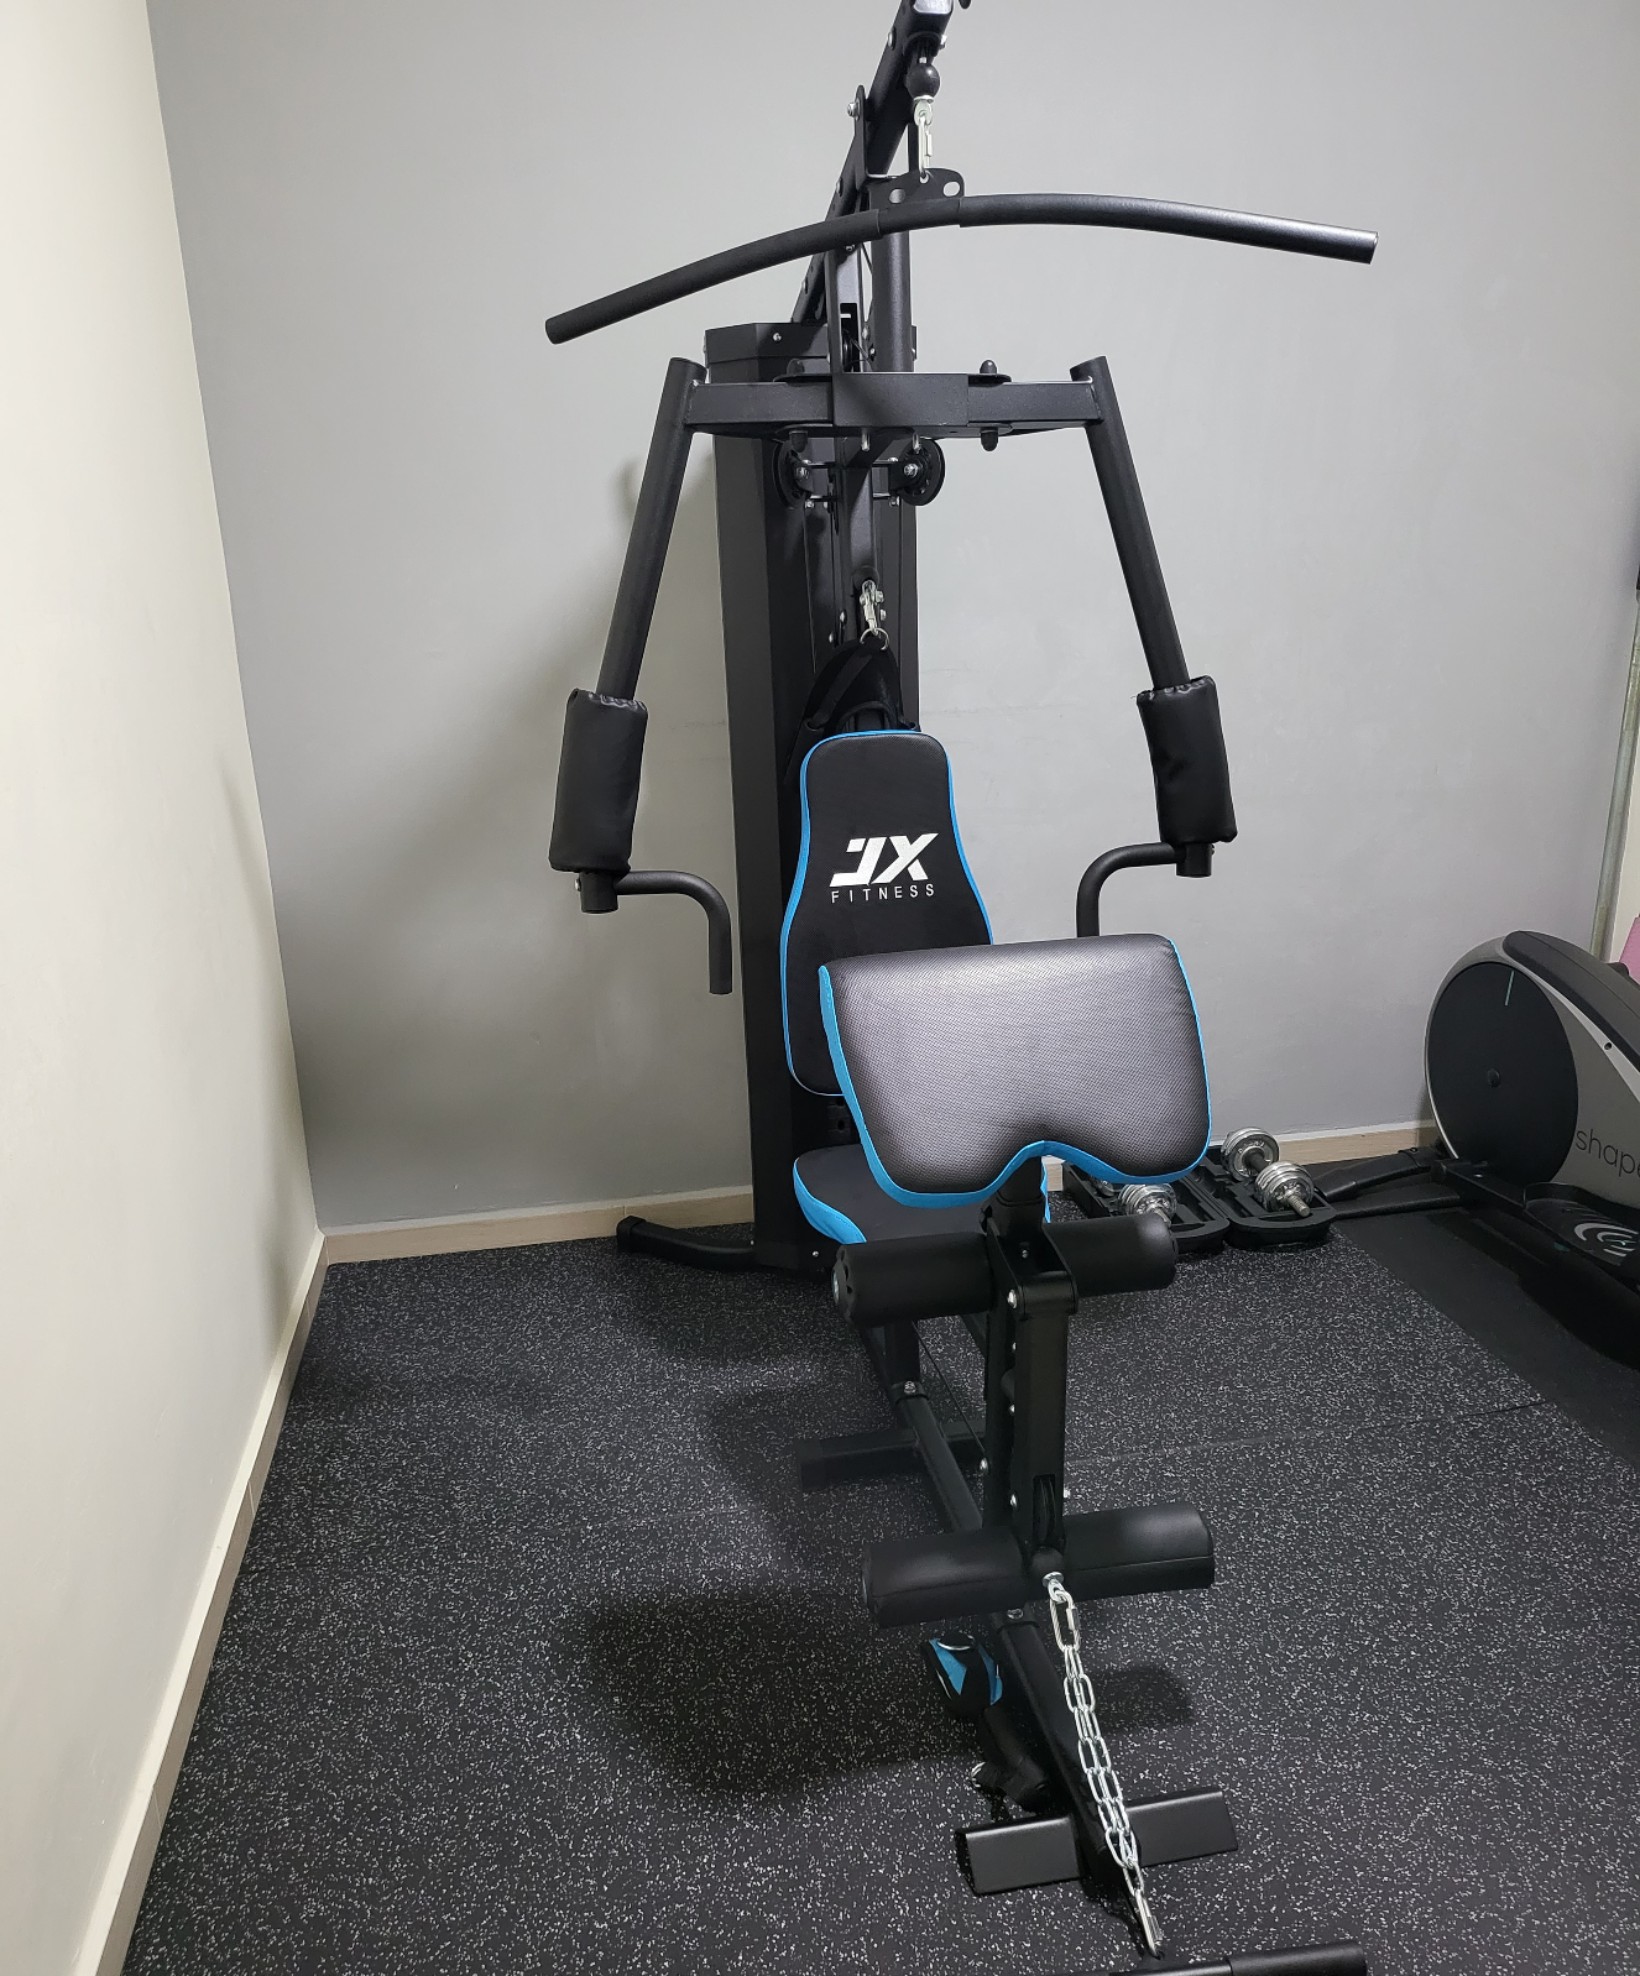 JX Fitness 913 Home Gym in Nairobi Central - Sports Equipment